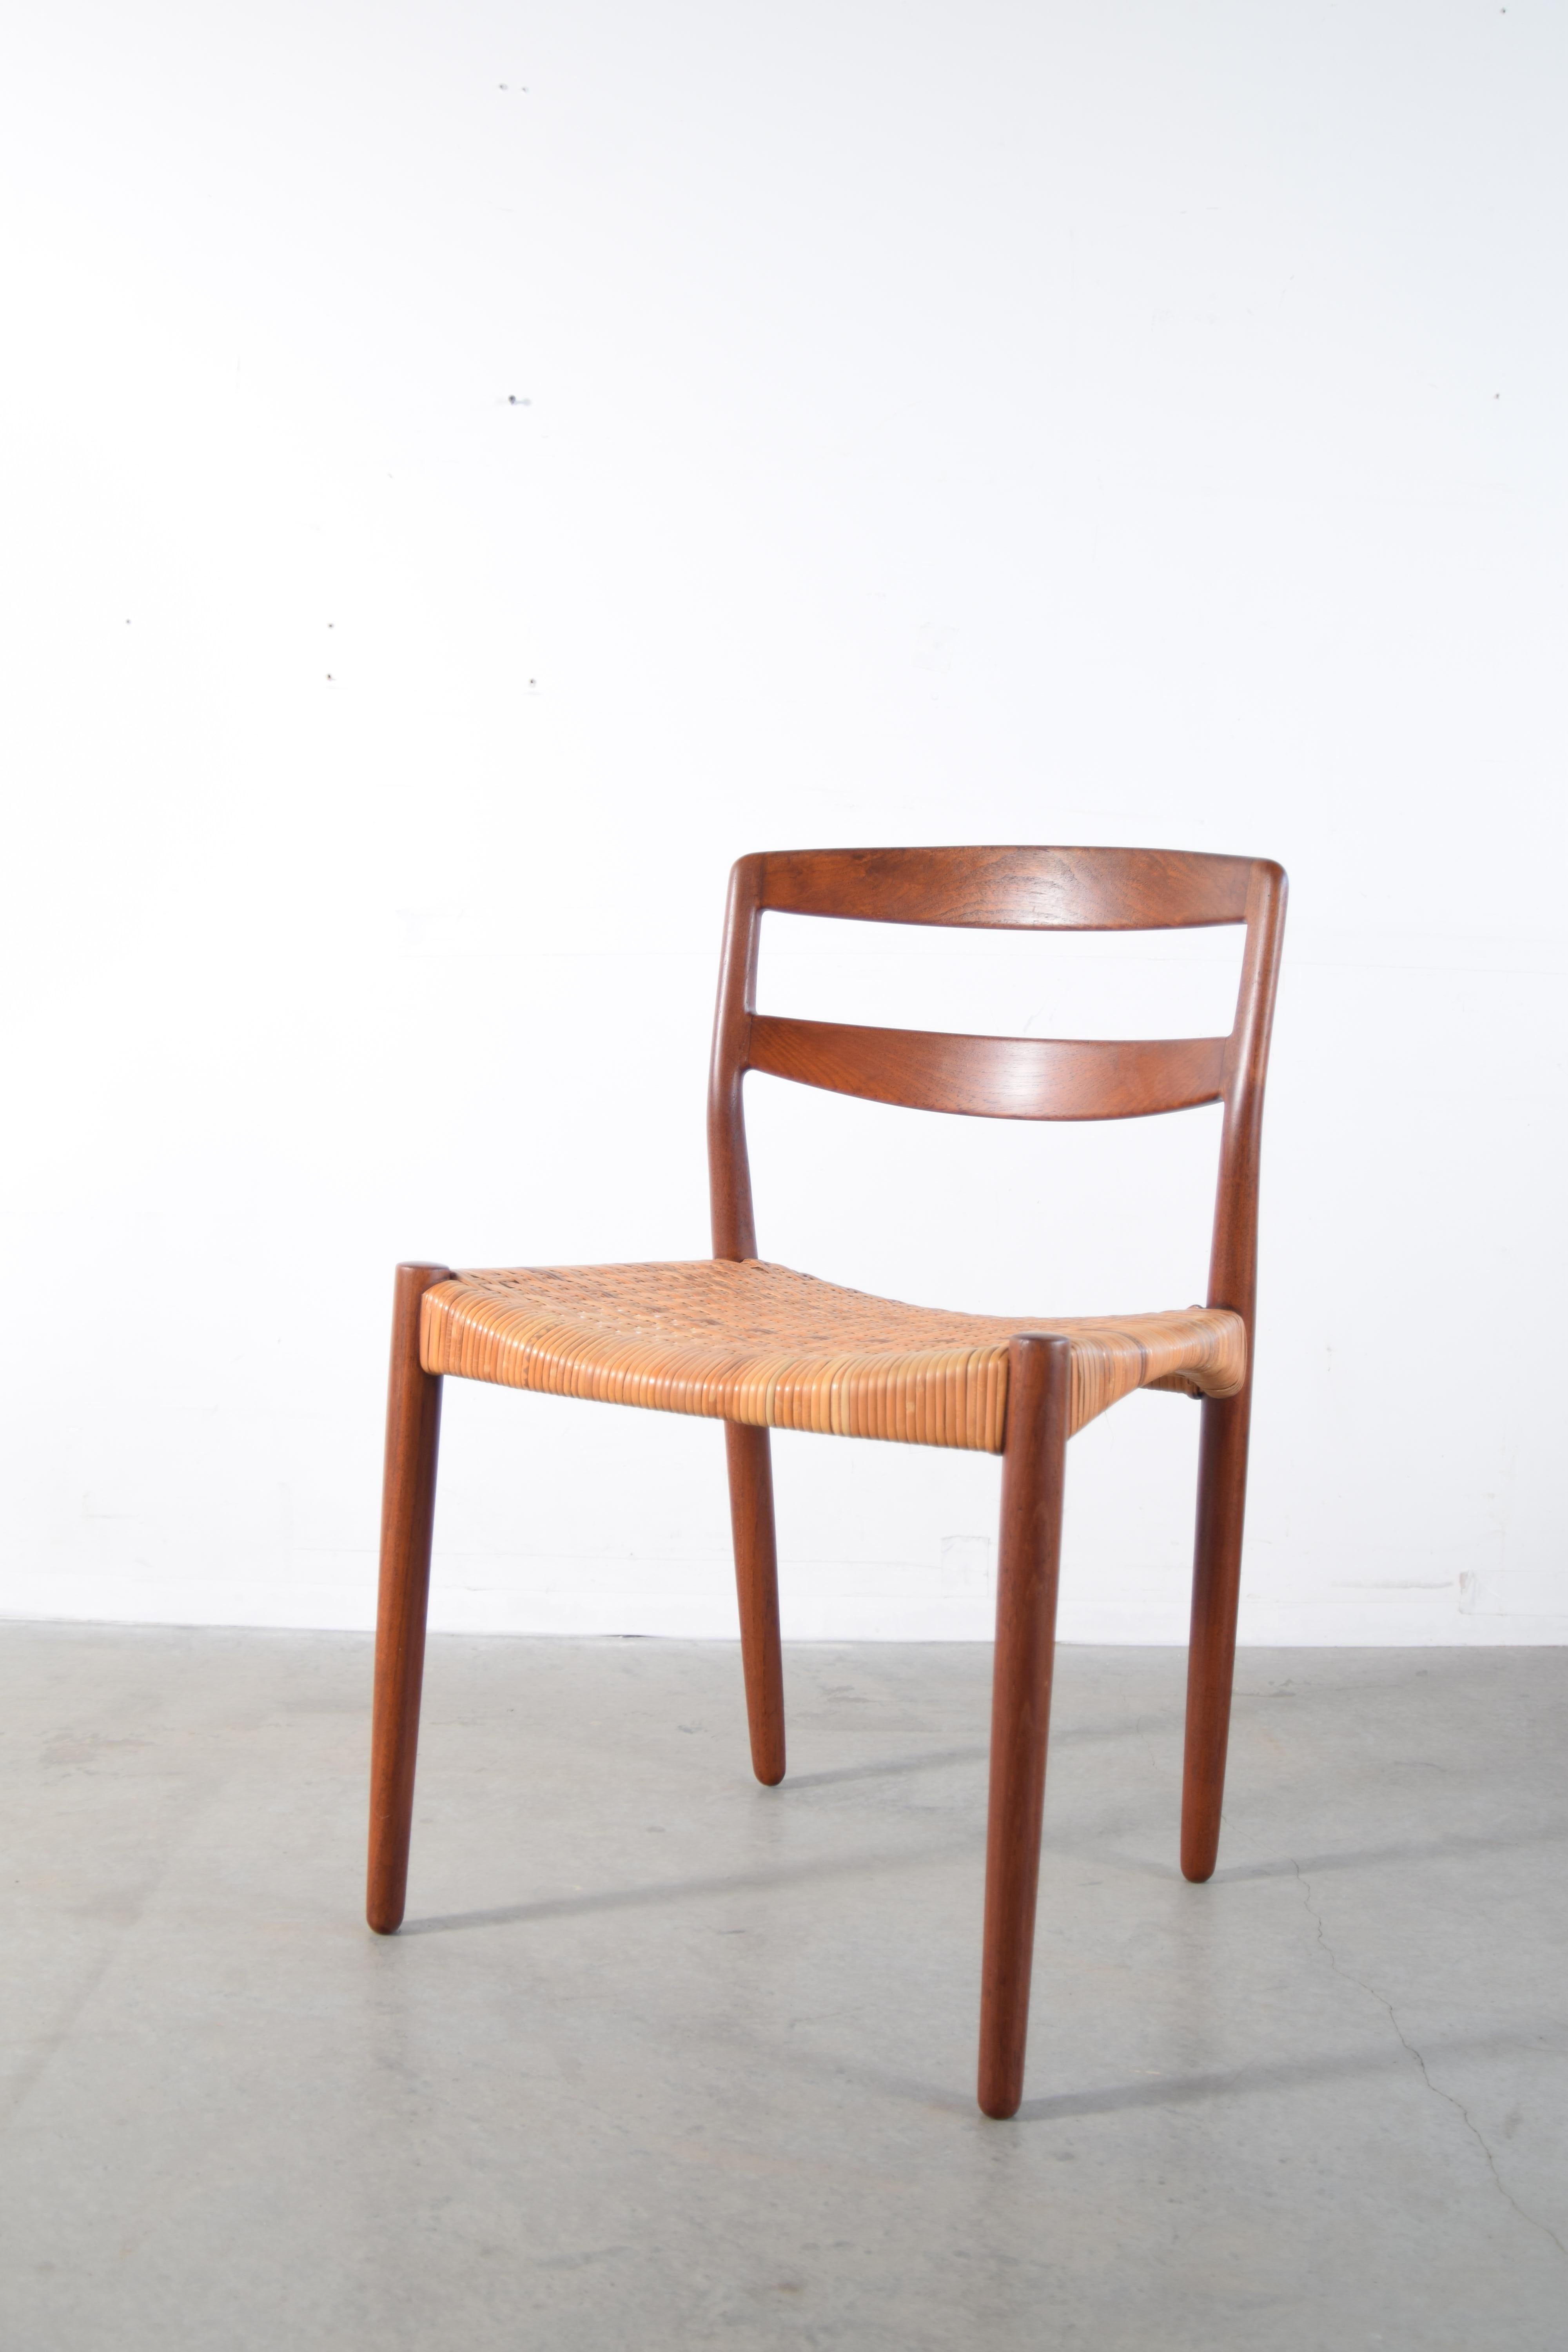 Pair of Ejner Larsen and Aksel Bender Madsen Teak and Cane Chairs For Sale 3